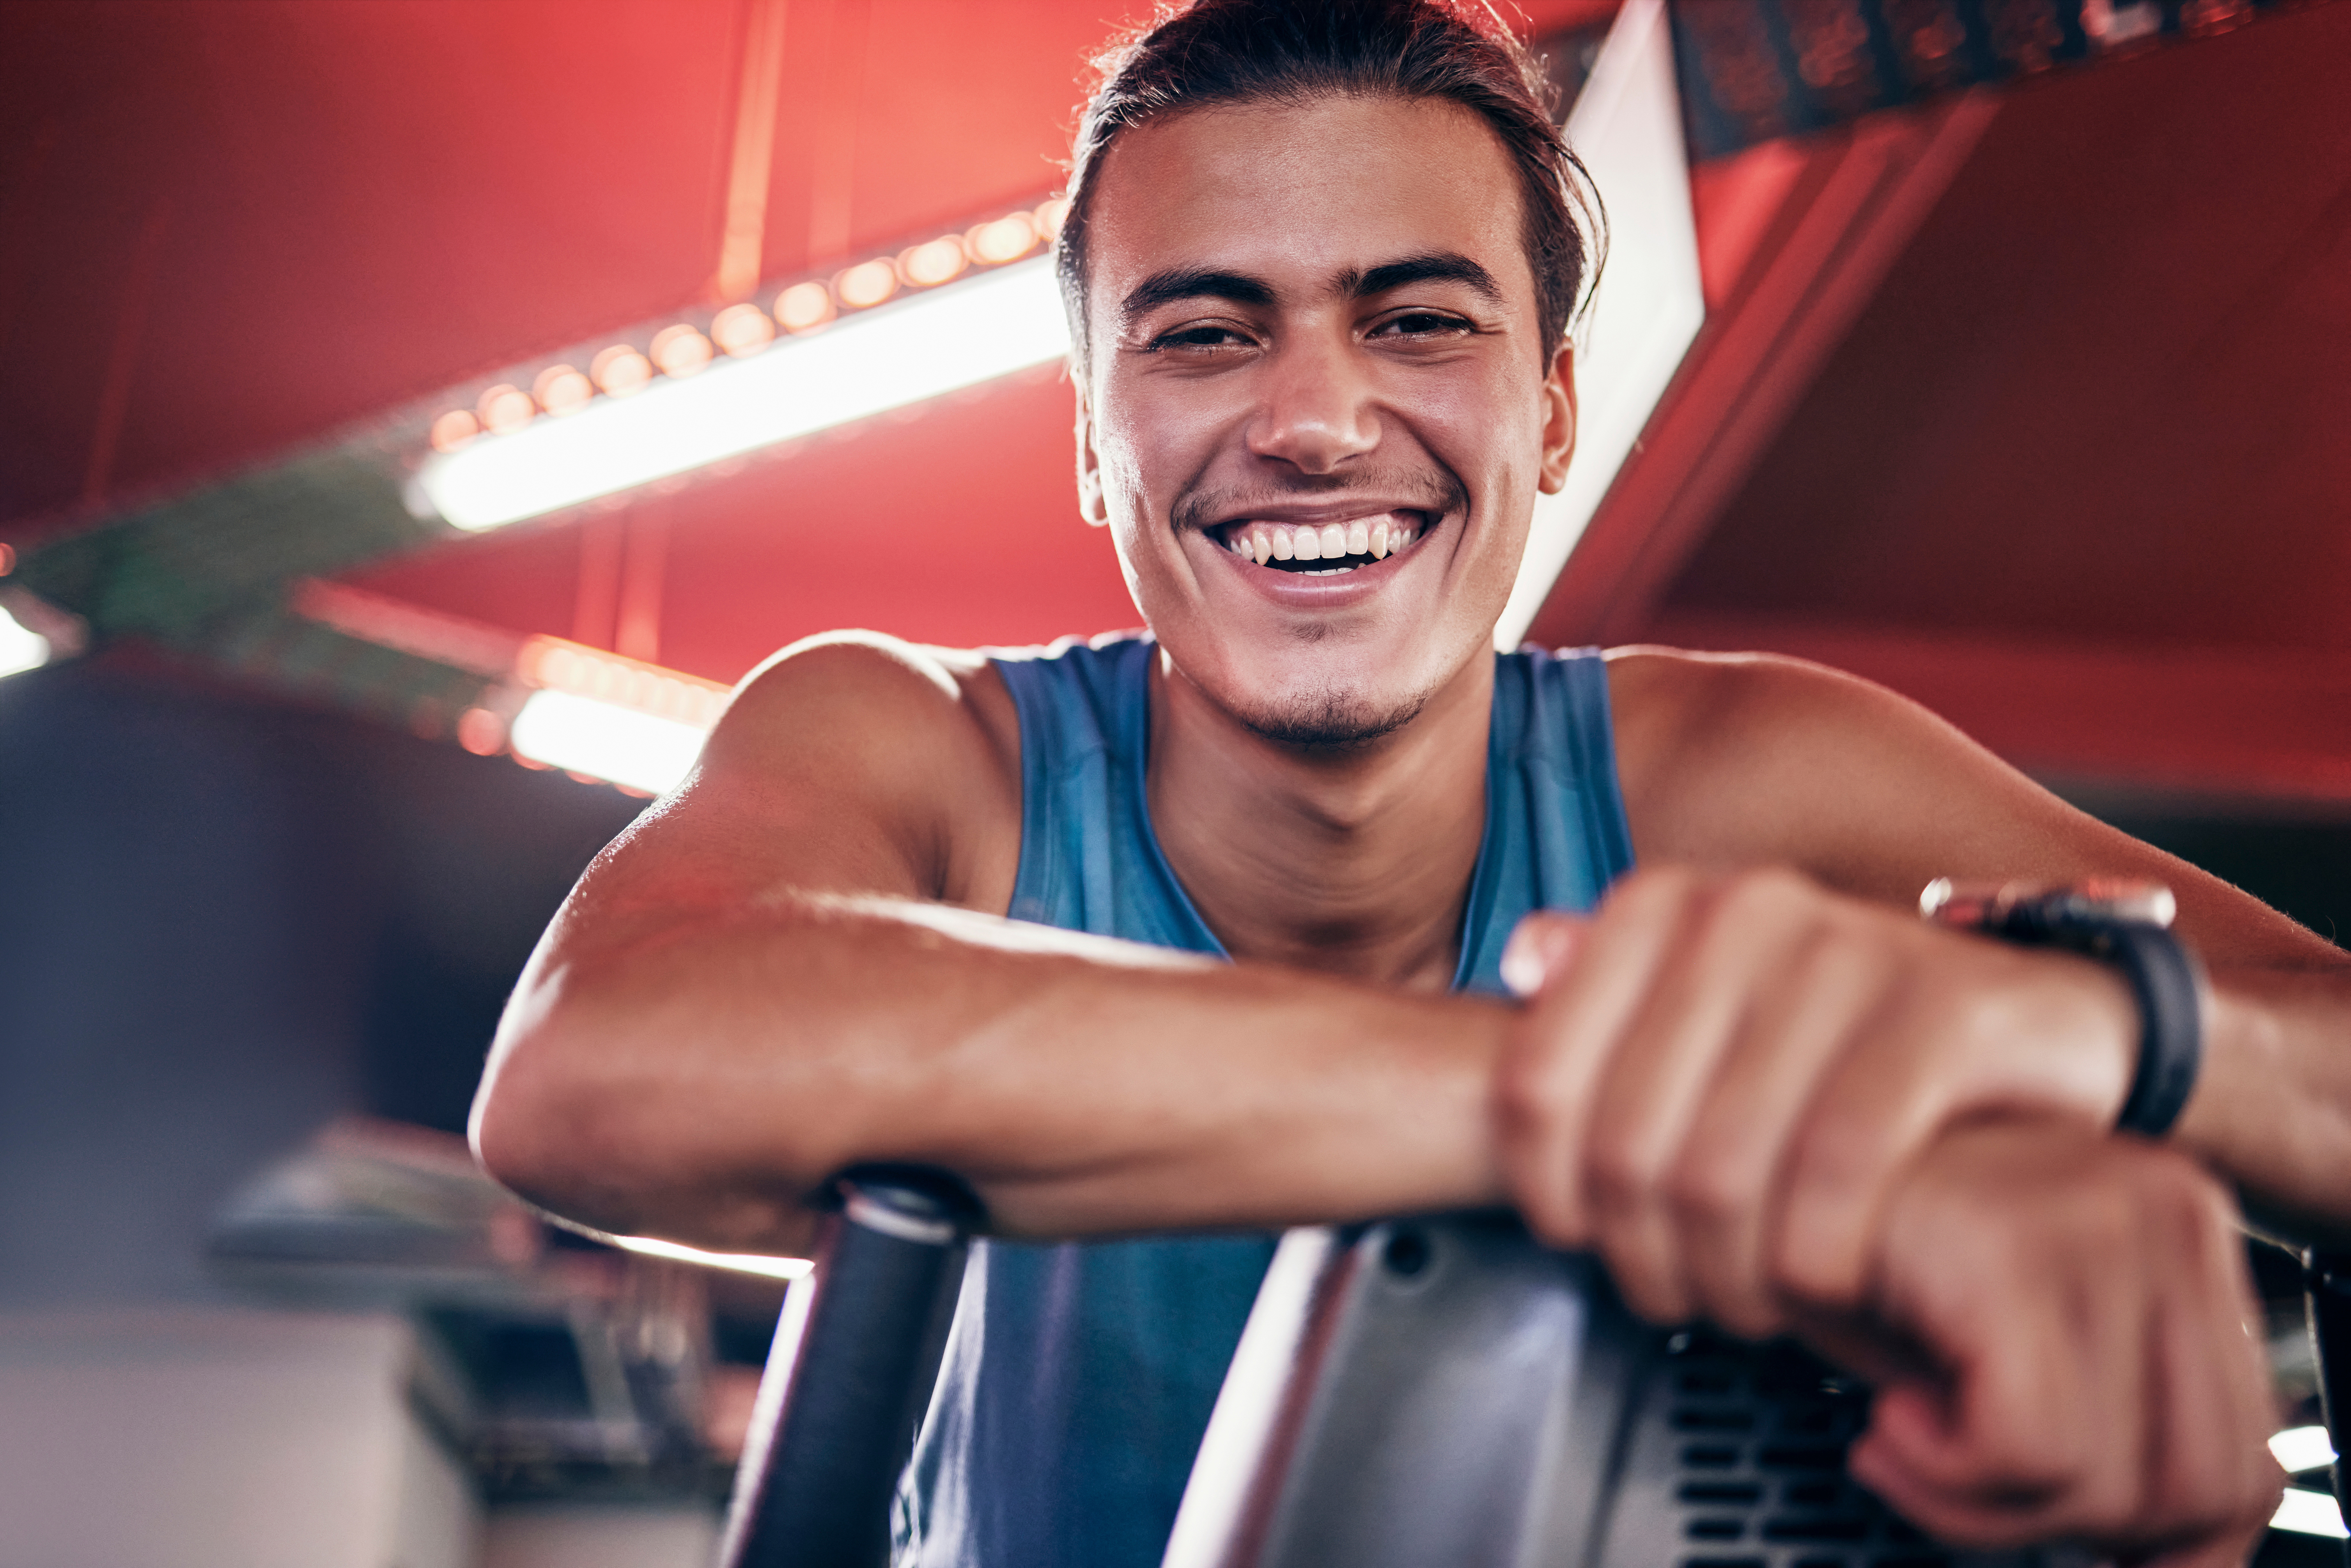 Fitness, smile and portrait of man in gym, happiness in workout exercise with equipment in studio.